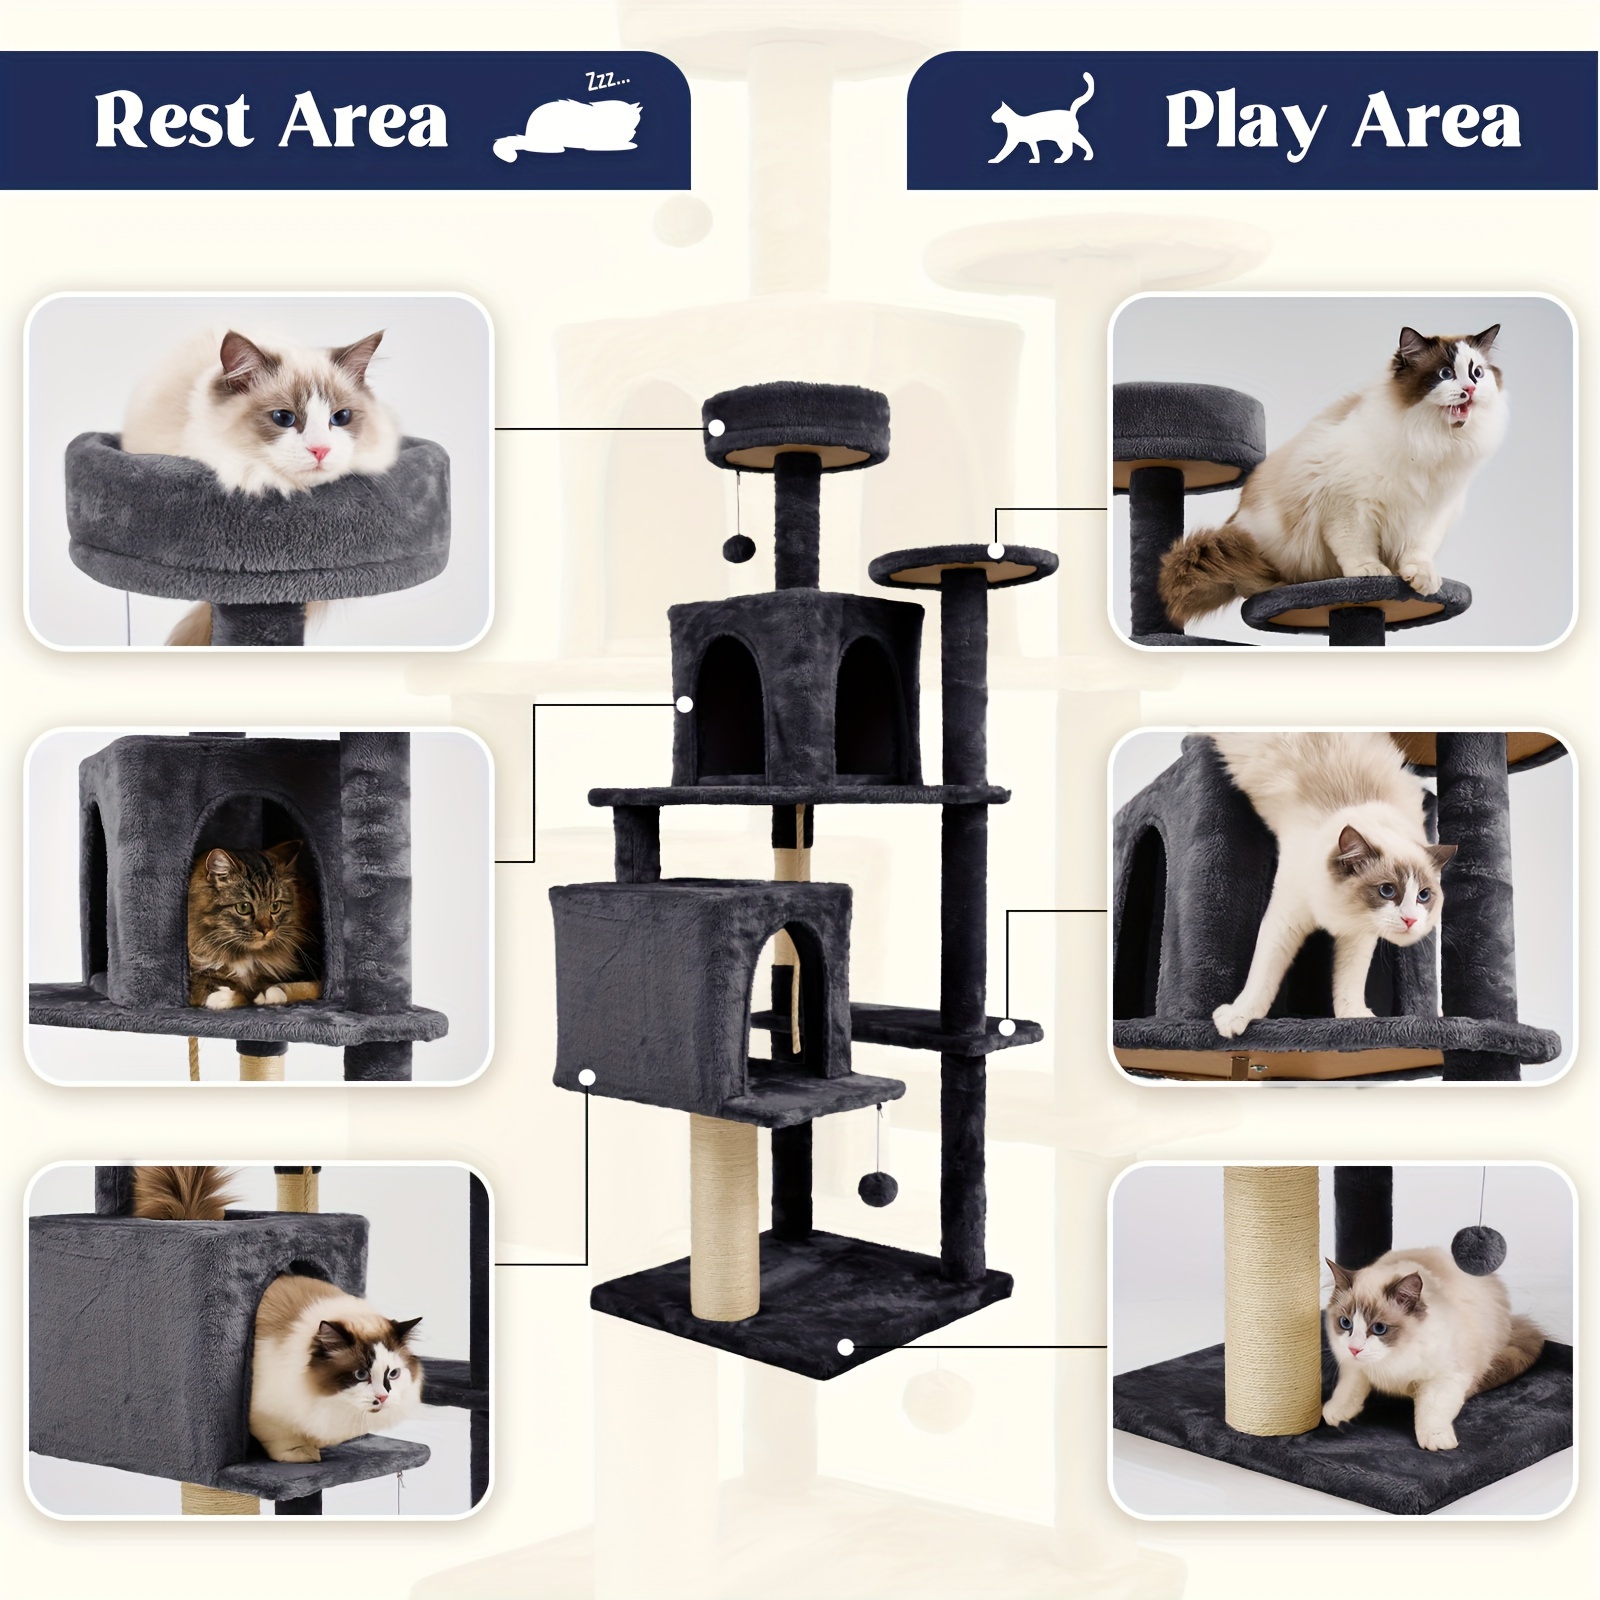 

Large Cat Tree Cat Tower For Indoor Cats, Cat House With Hang Ball Toy, Cat Sisal Scratching Post, Dark Grey